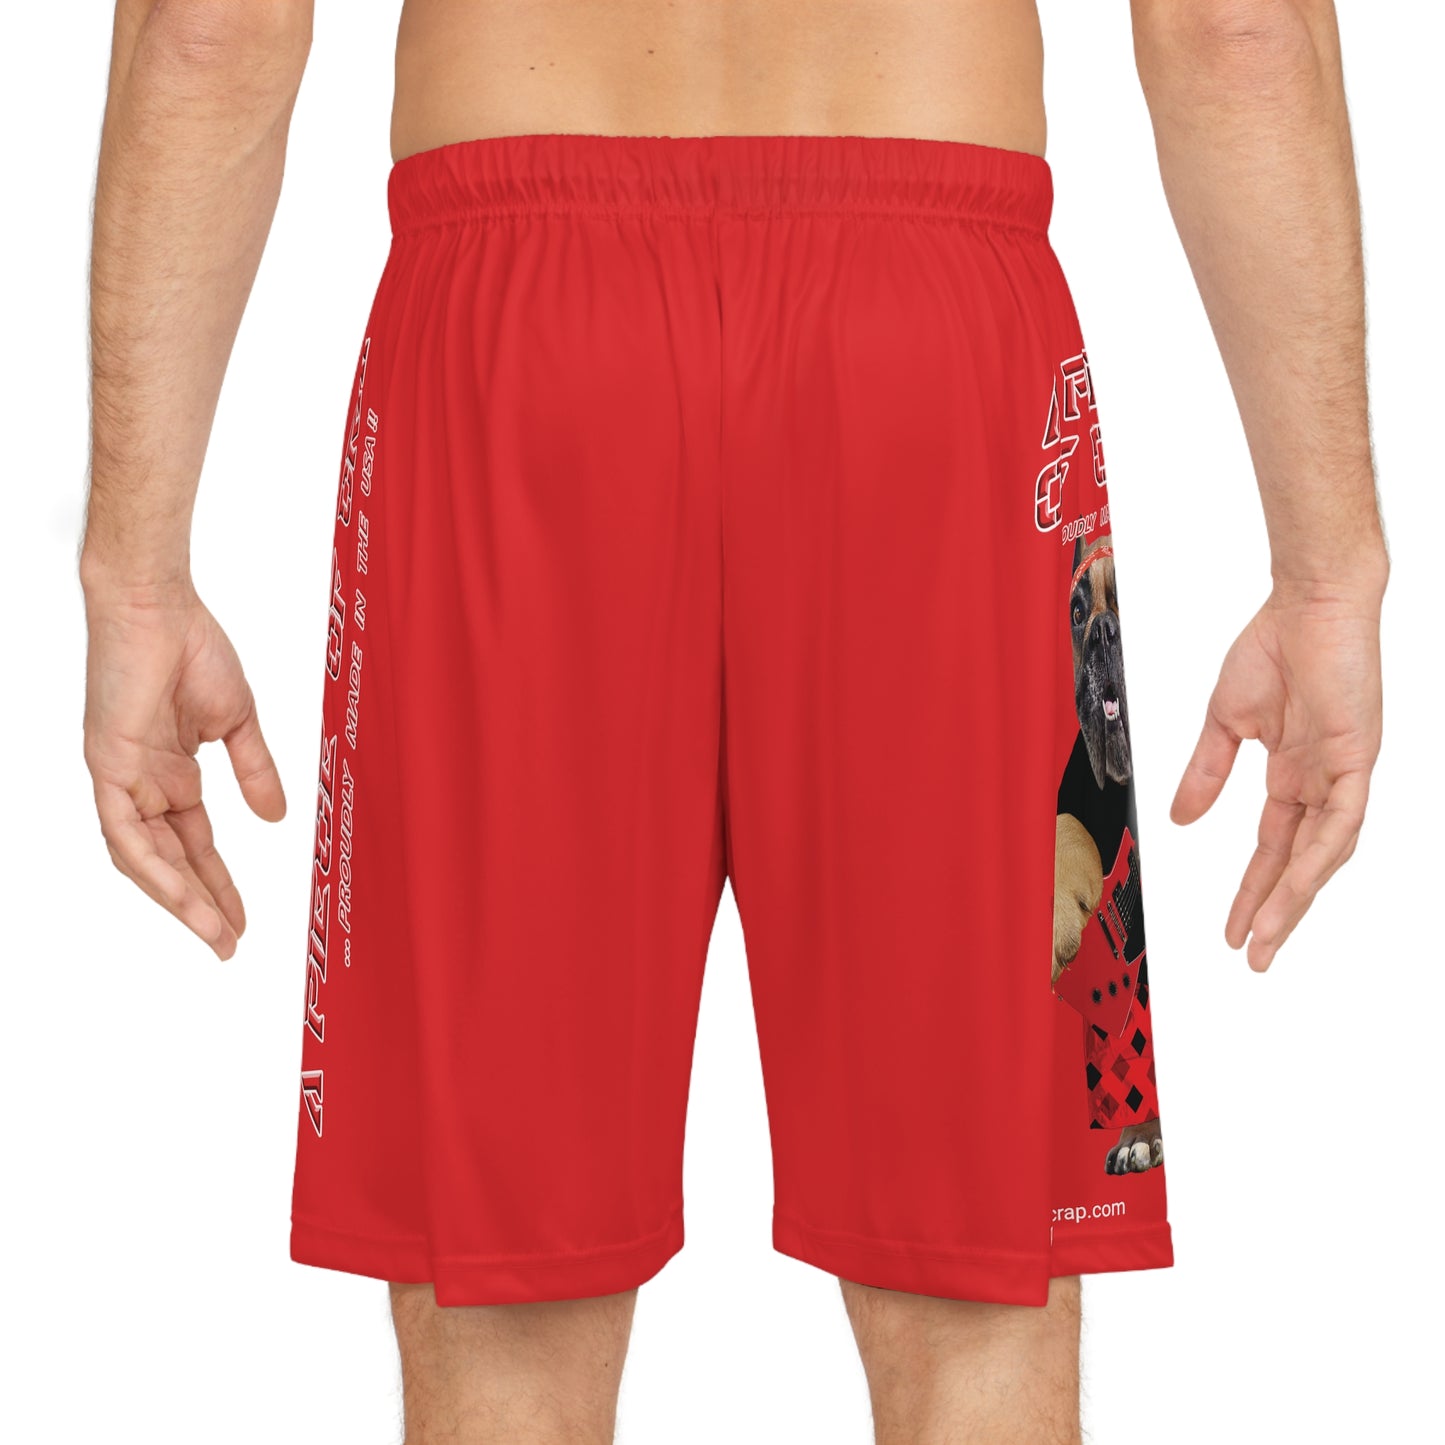 A Piece Of Crap II Basketball Shorts - Red